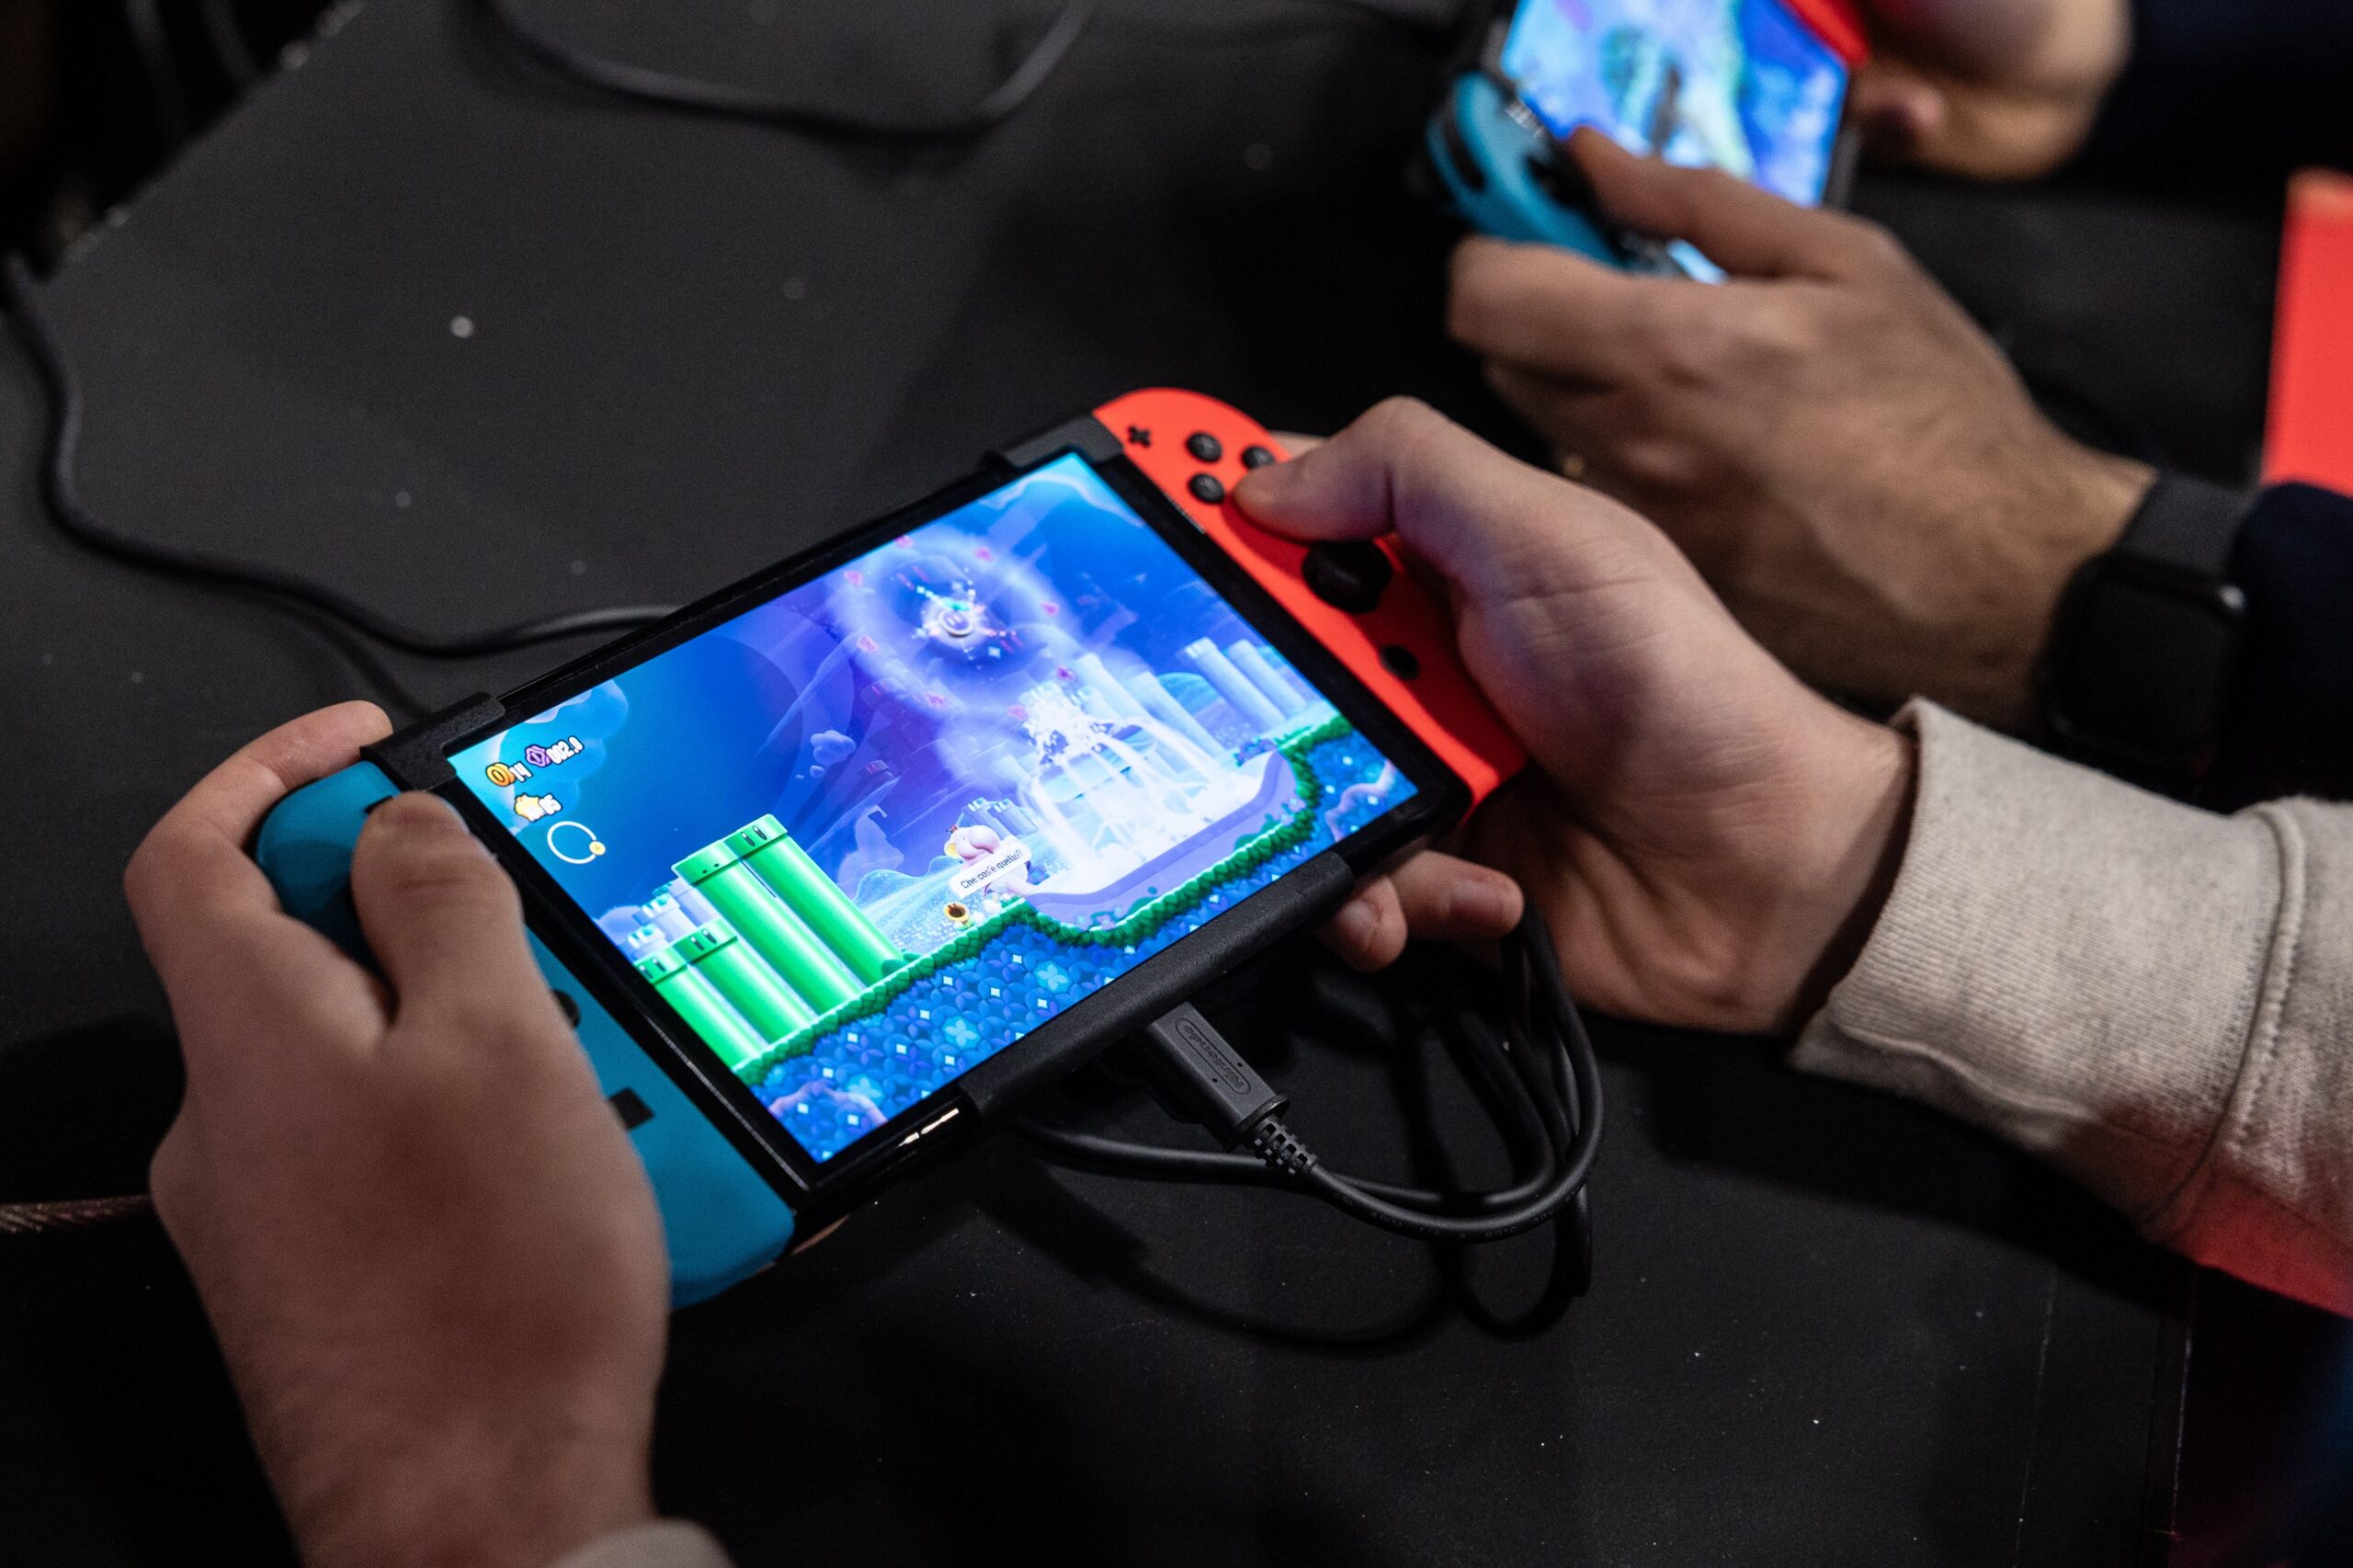 Two men use an Oled model Nintendo Switch gaming system while playing video games at the Japanese publisher Nintendo Switch's stand during Milan Games Week 2023